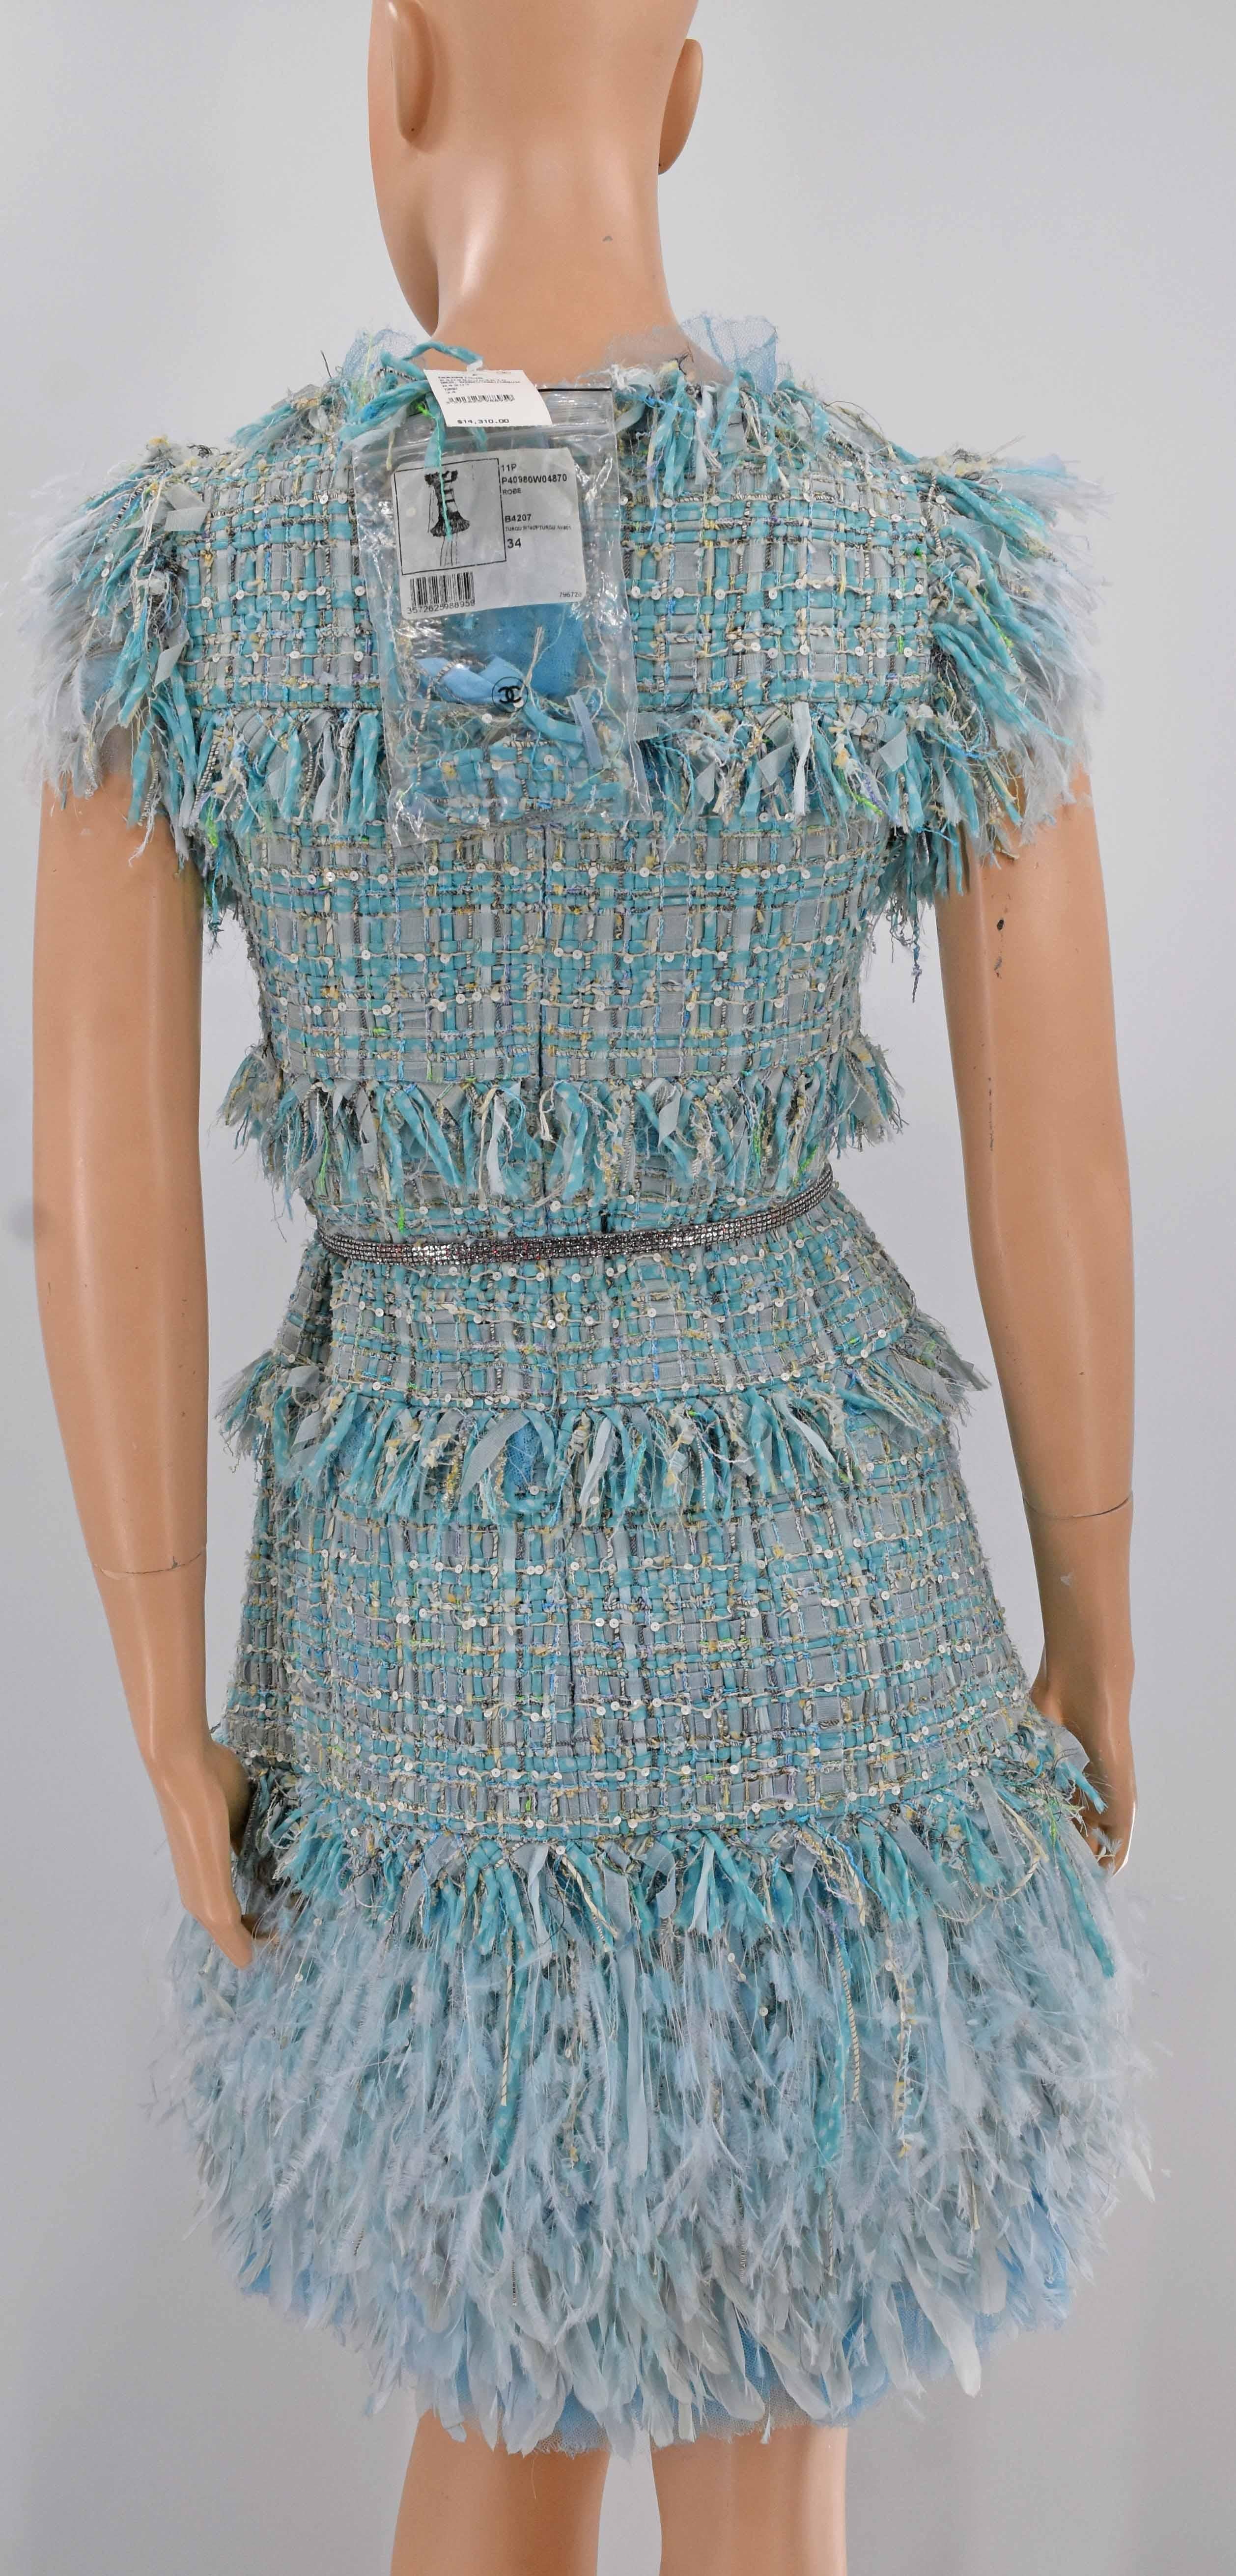 Gray Chanel Tweed Jeweled Runway Fringe Dress With Belt NWT $14, 310 11P Spring 2011 